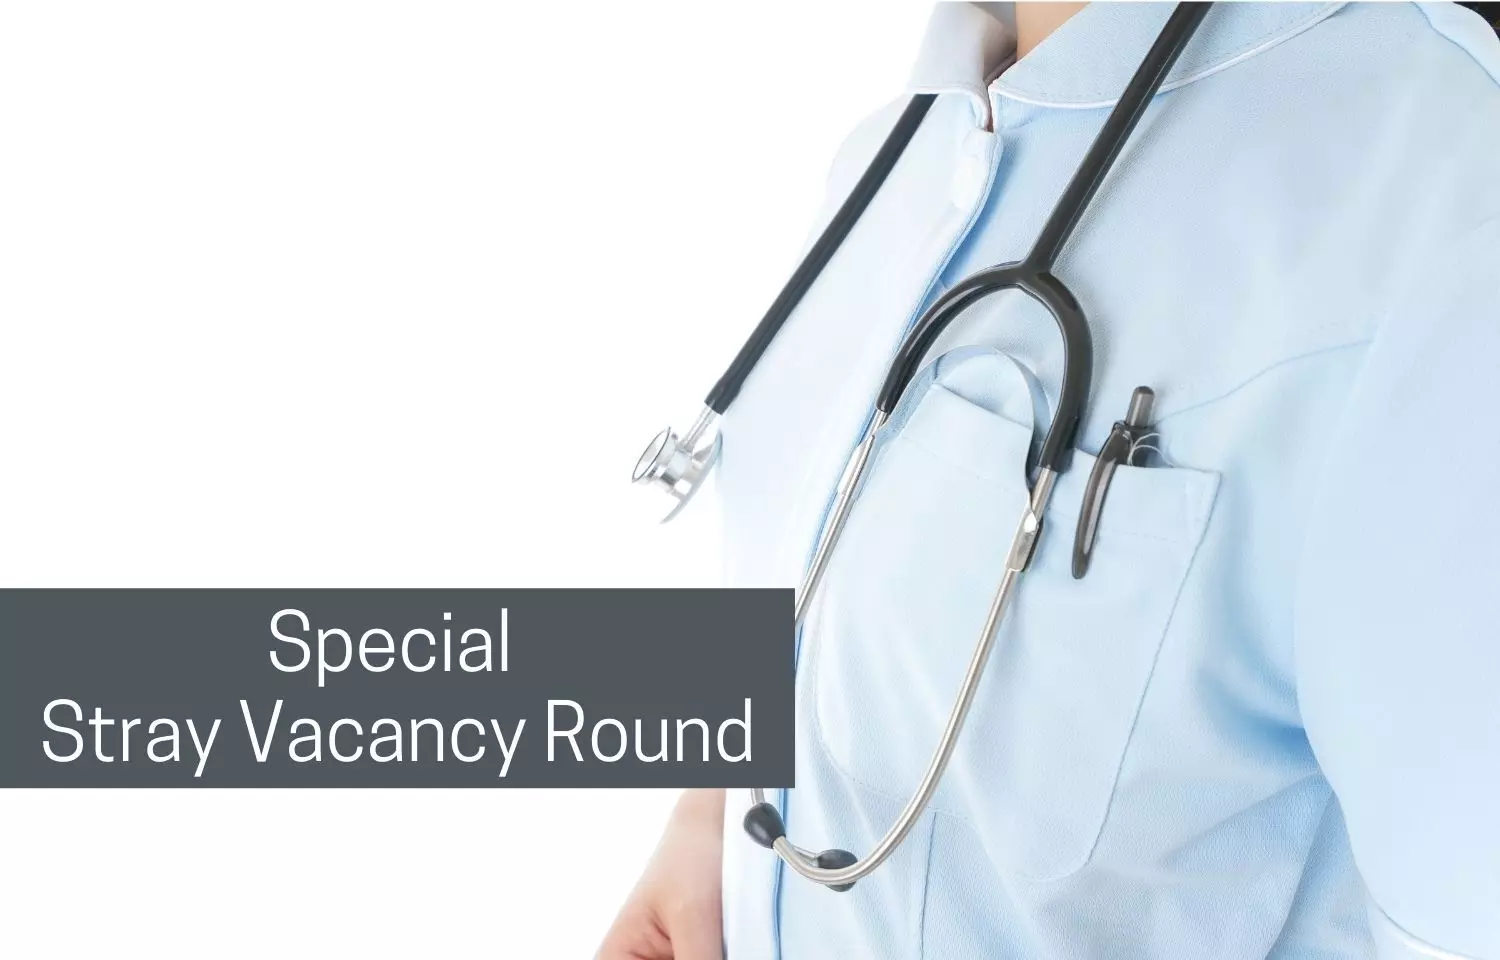 AIIMS to hold Special Stray Vacancy Round for 10 leftover seats of BSc Nursing Hons course, Check out schedule, Details